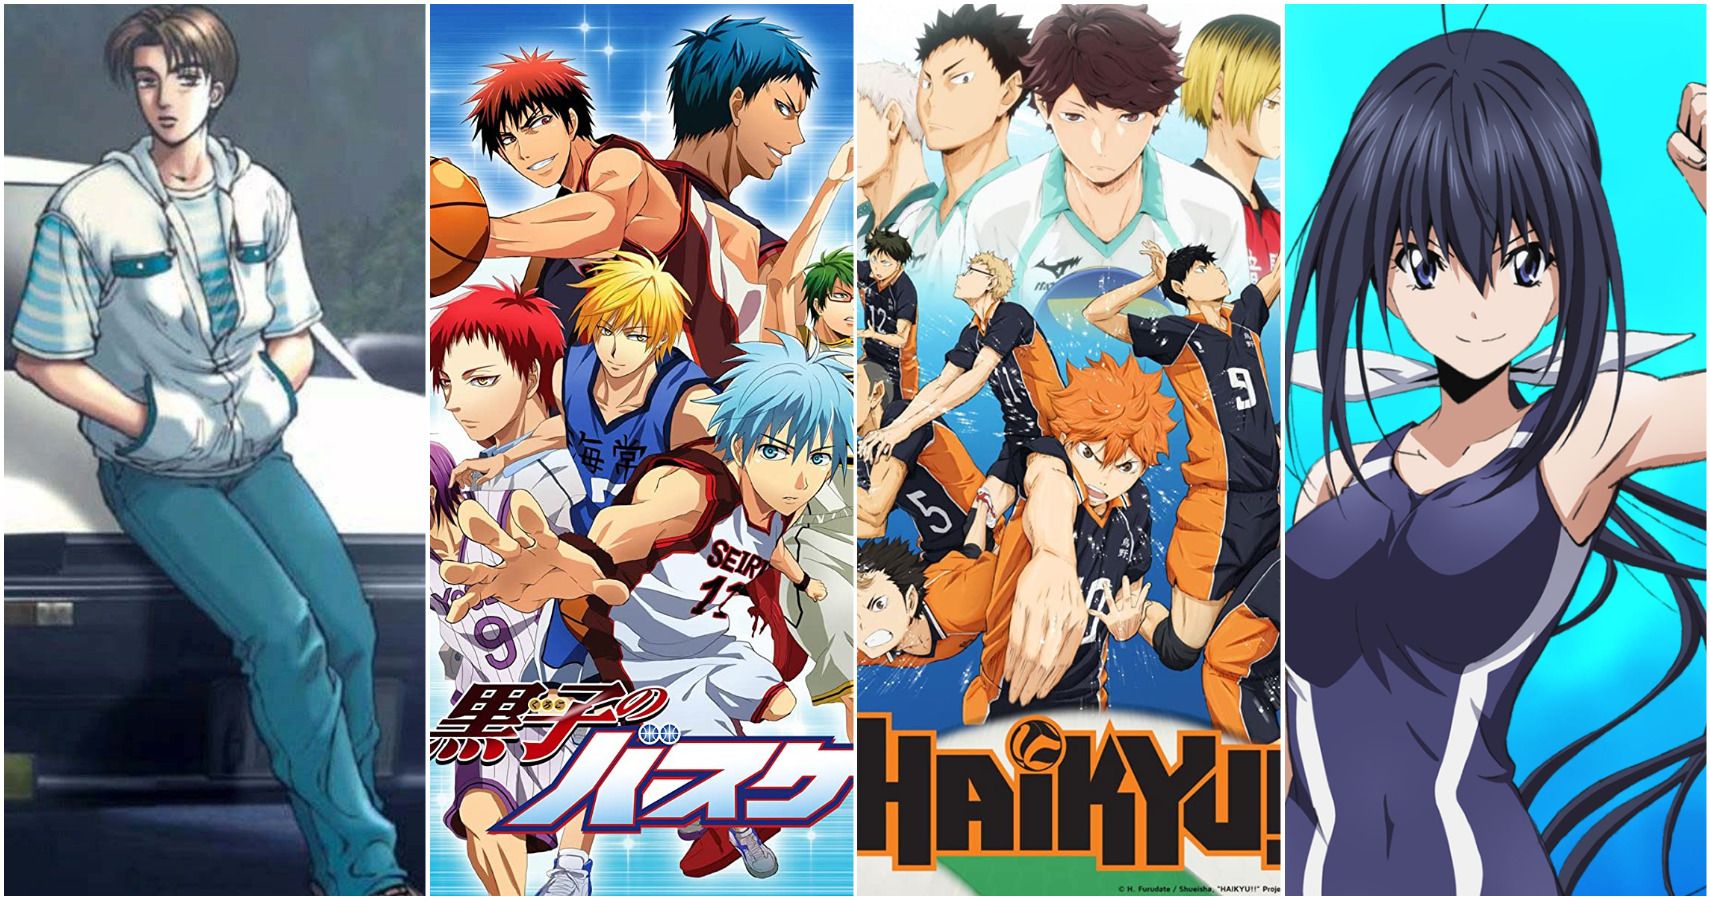 Sports Anime: Which One Should You Watch Based On Your MBTI®?